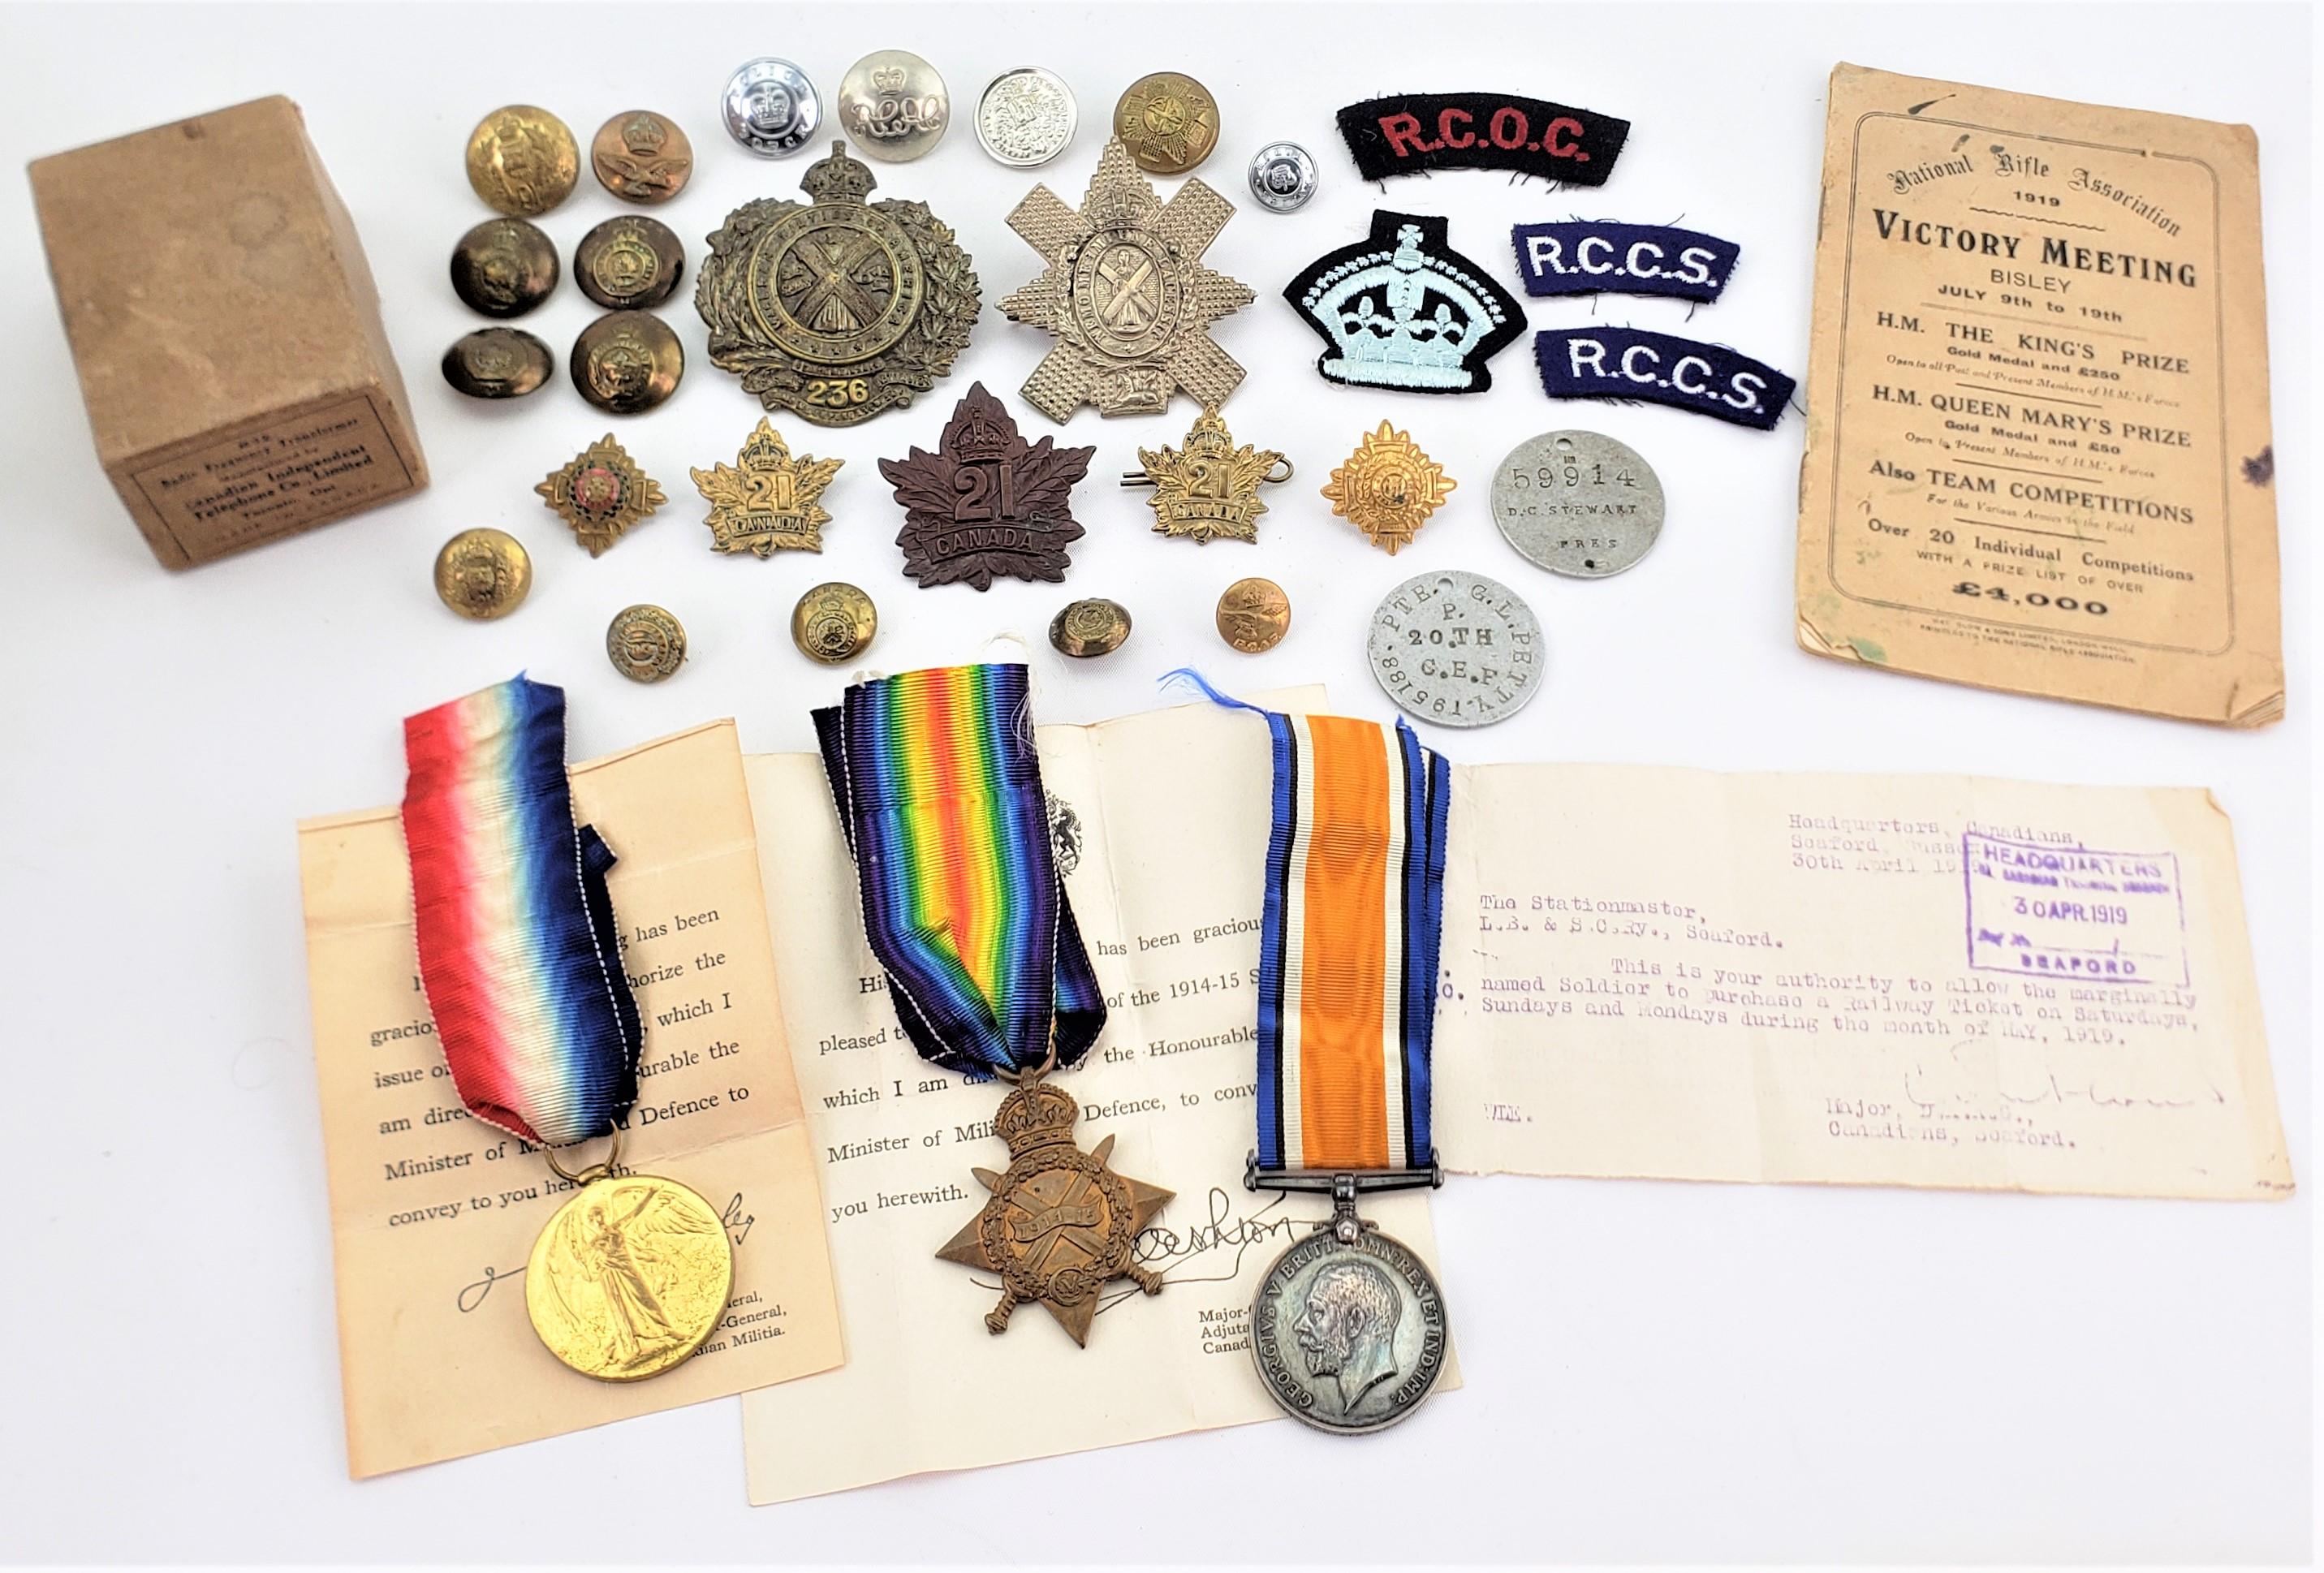 This grouping of some three dozen WW1 items come from the estate of CPL. D.C Stewart who served in the Infantry of the 21st Regiment of the Canadian Armed Forces stationed in Kingston, Ontario Canada. The grouping includes his hat and uniform